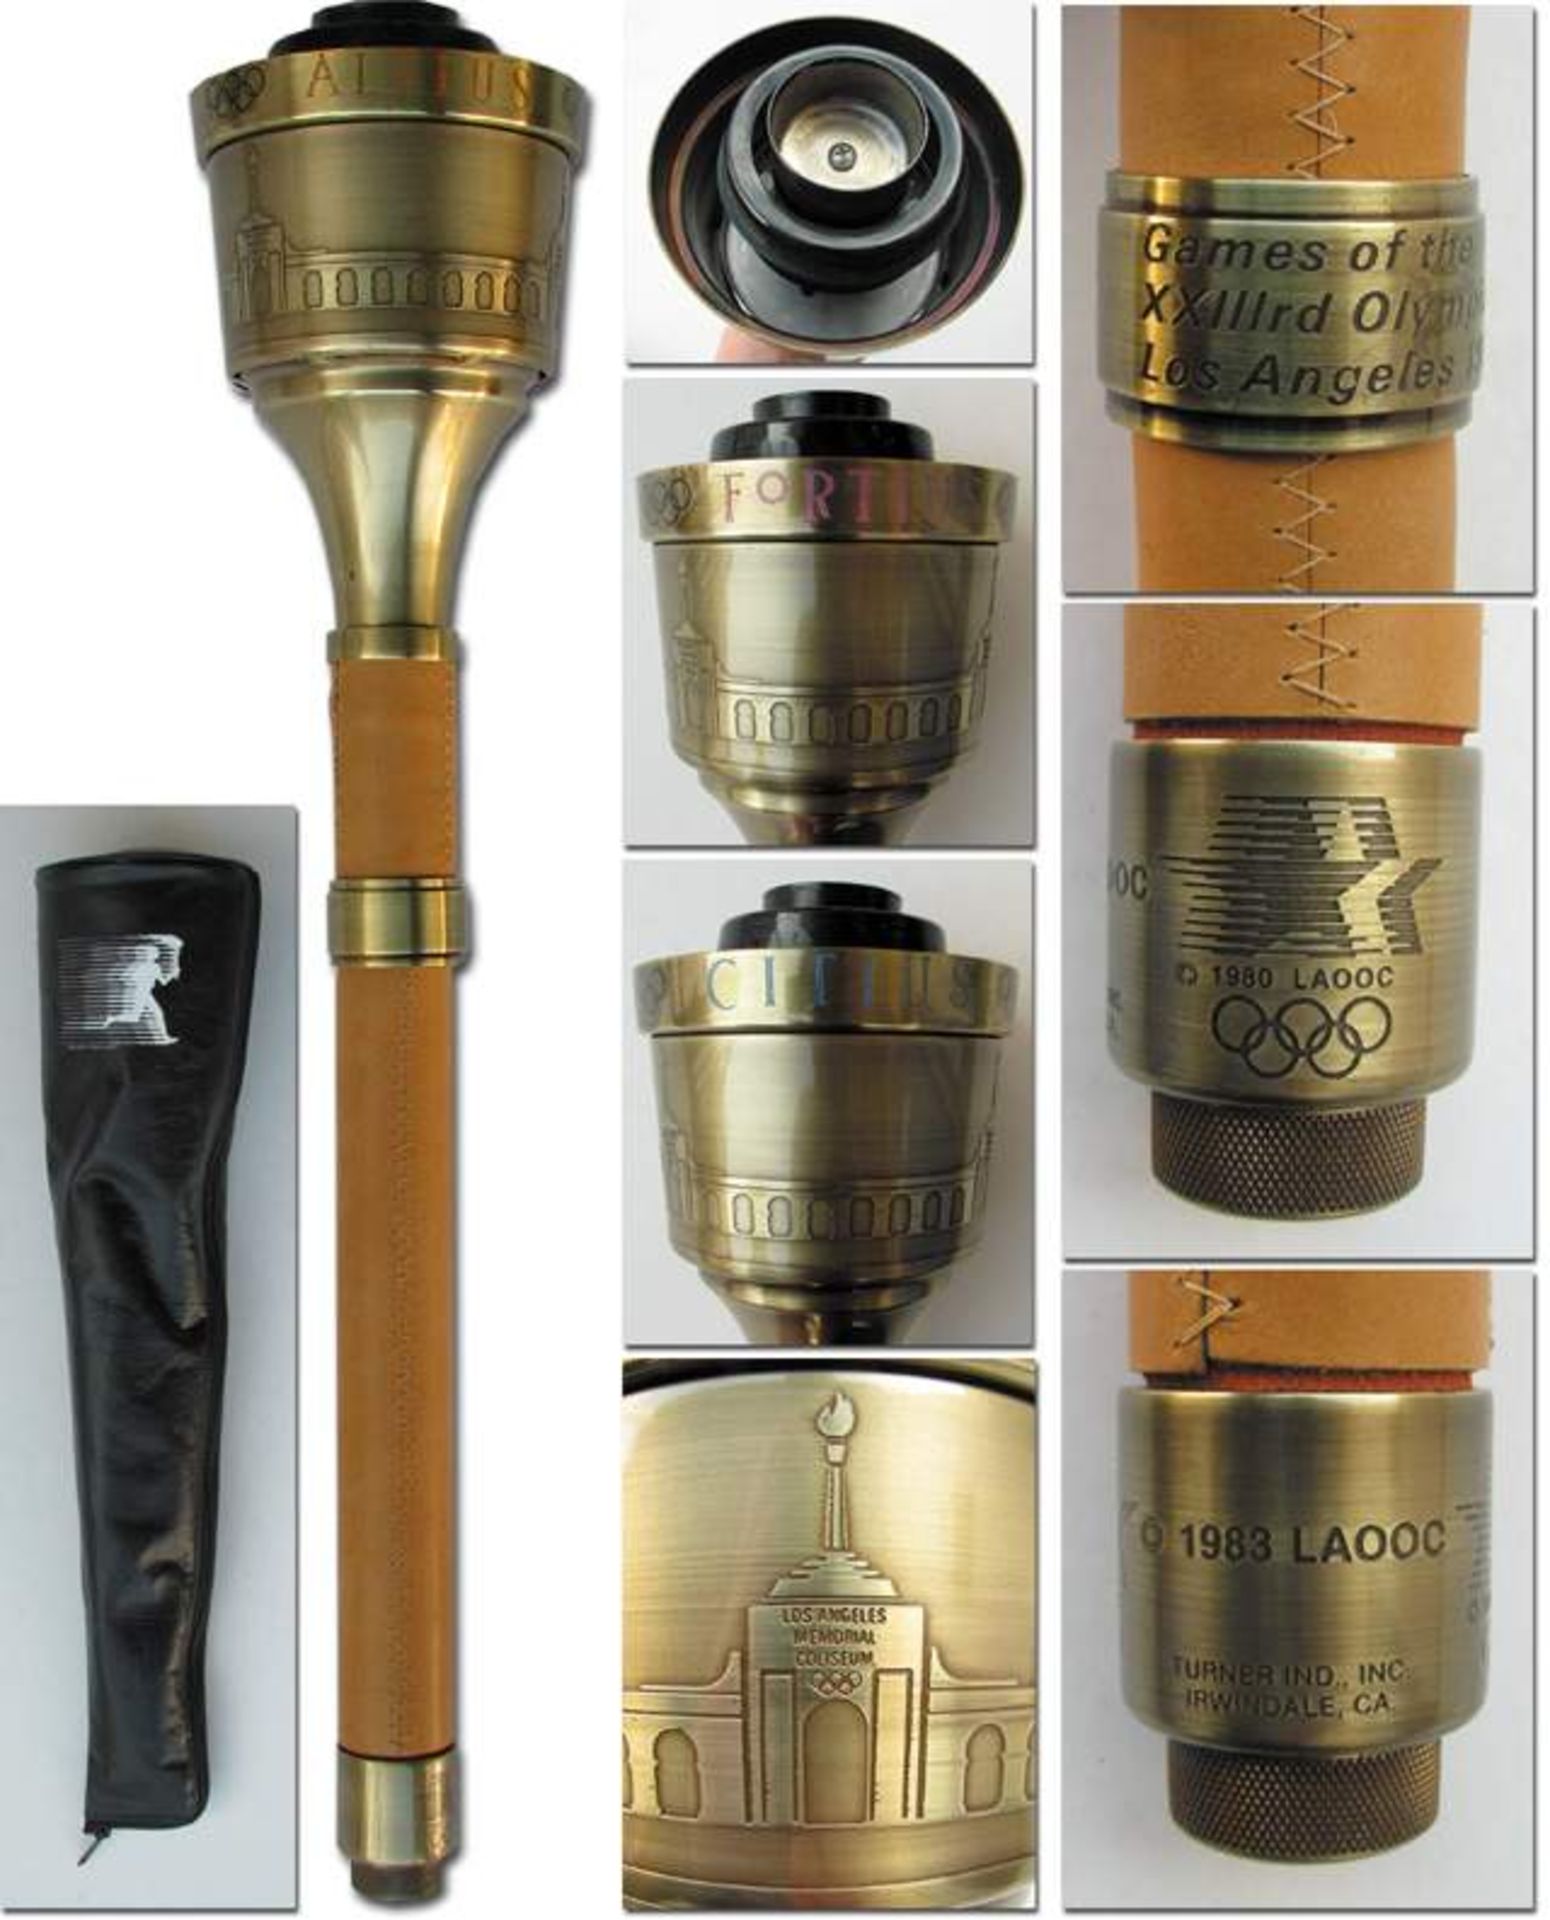 Olympic Games Los Angeles 1984. Official Torch - Official torch from the Olympic Games Los Angeles